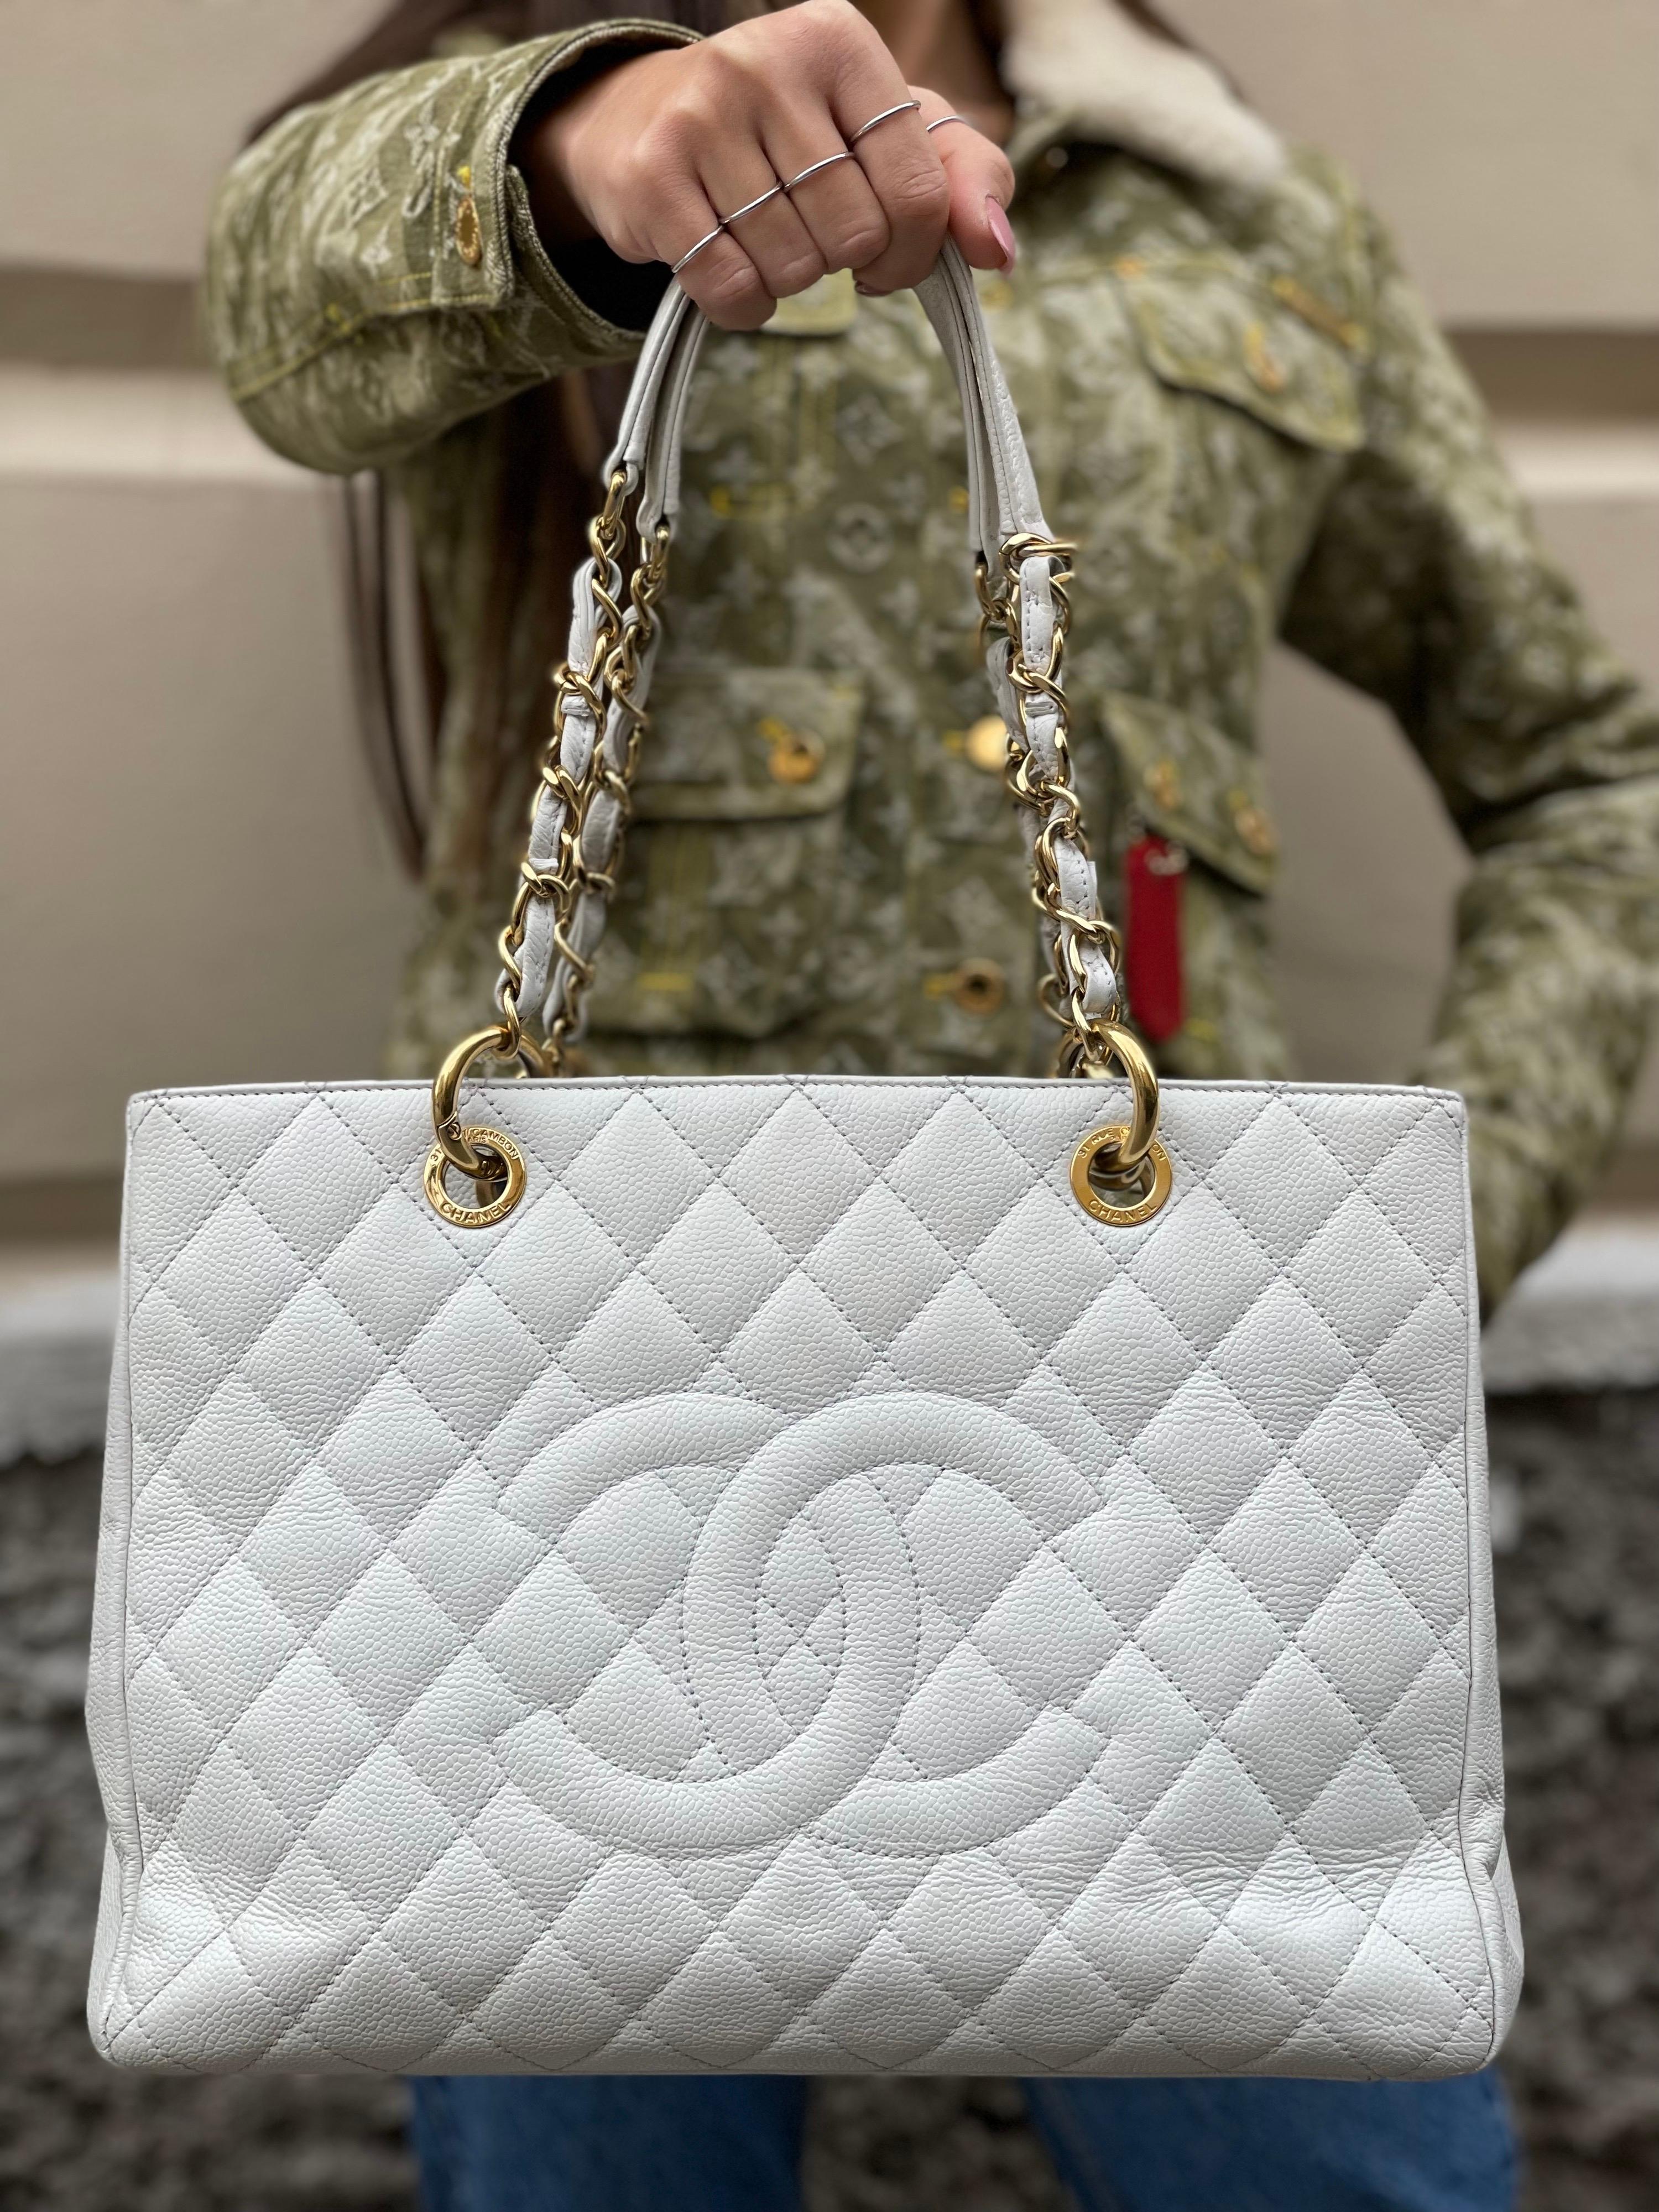 2011 Chanel White Leather GST Bag 1